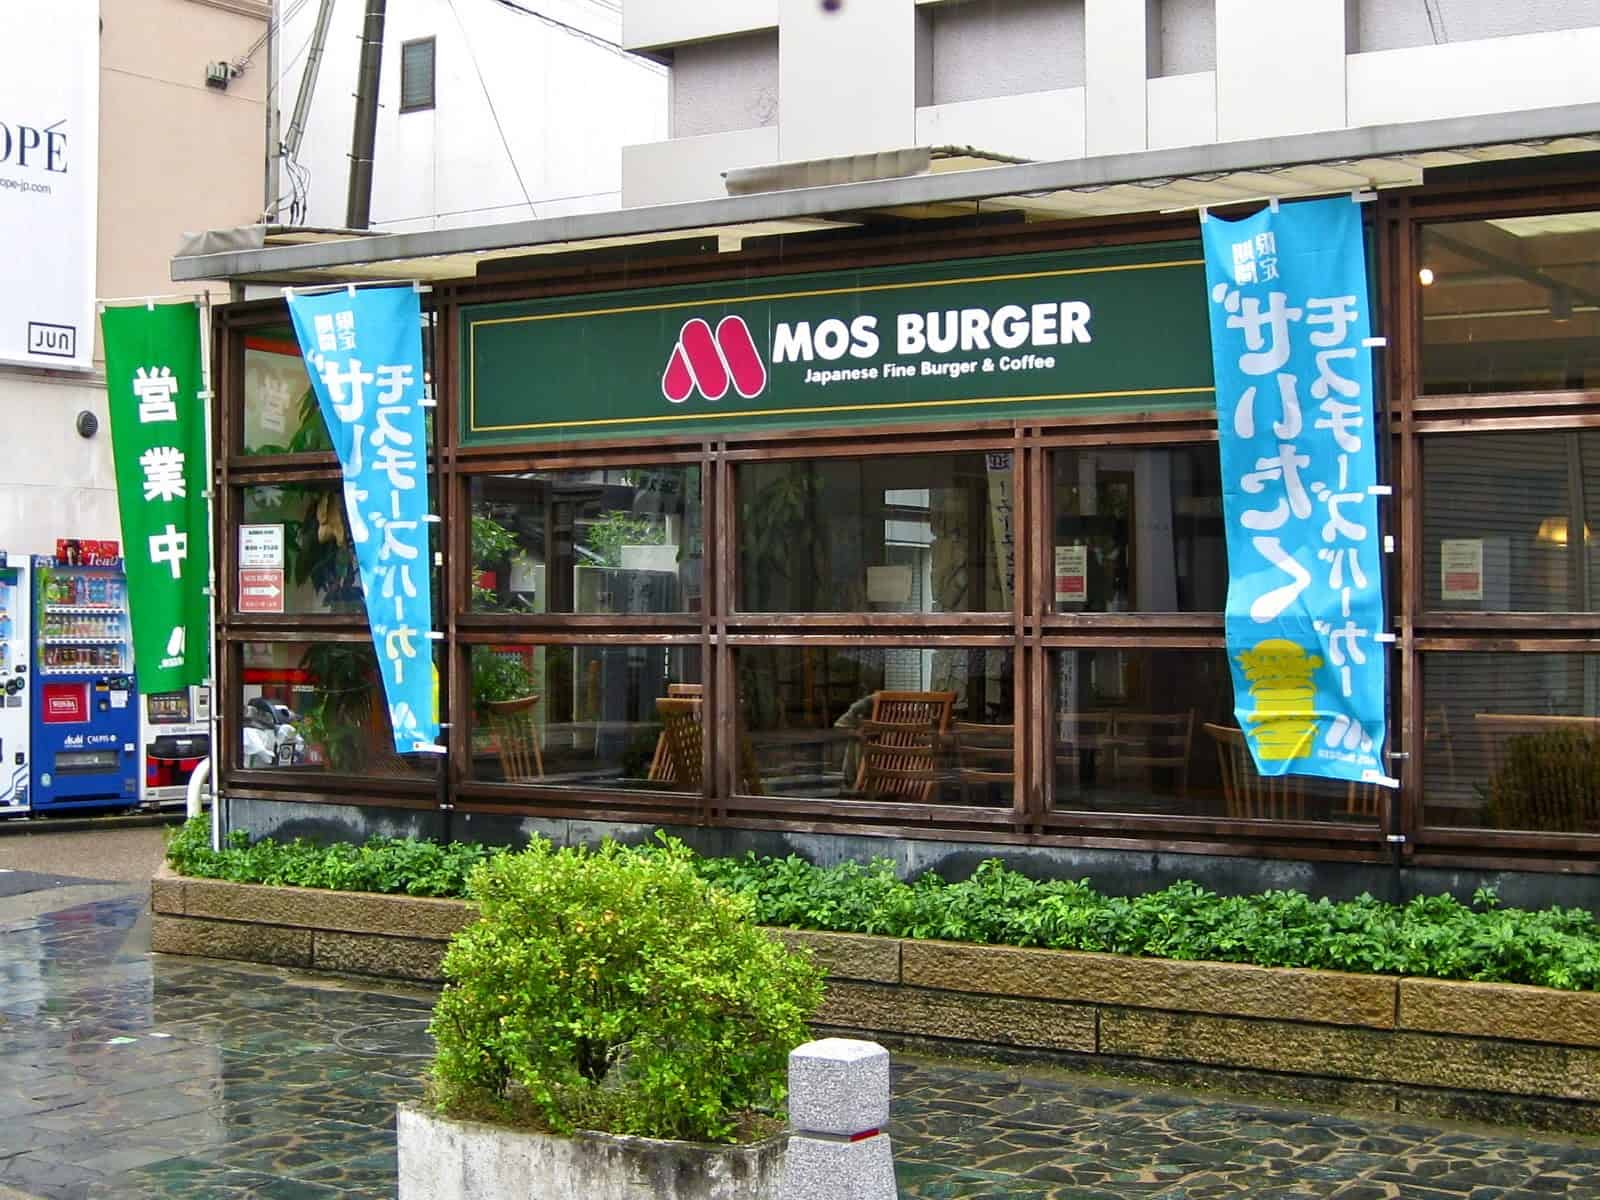 MOS Burger from outside the building.